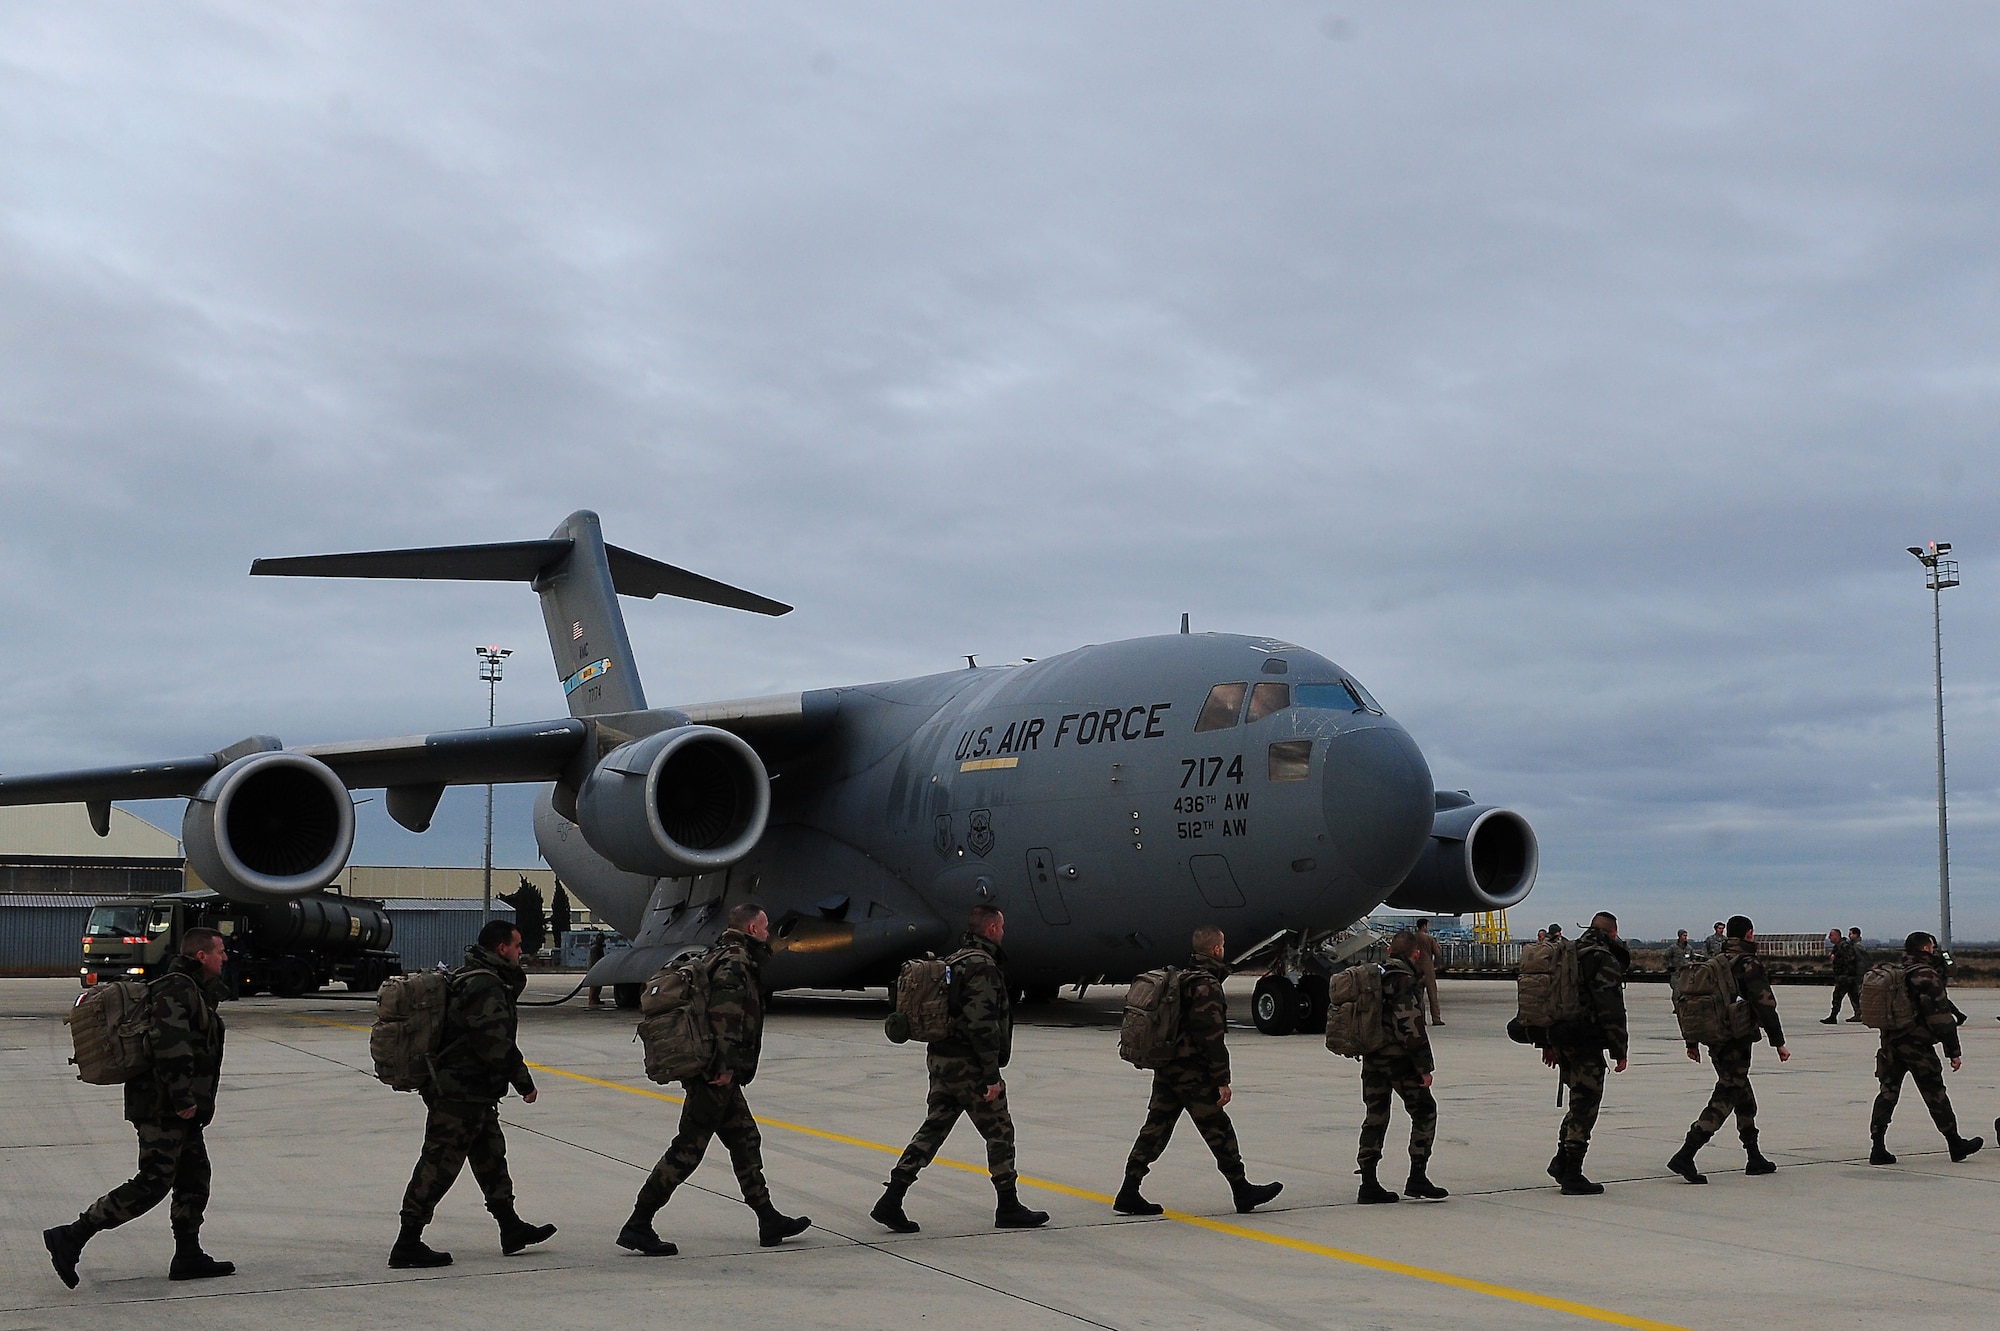 ISTRES, France - French soldiers march to a U.S. Air Force C-17 Globemaster III in support of missions in the Republic of Mali. The United States has agreed to help France airlift troops and equipment into Mali. (U.S. Air Force photo by Senior Airman James Richardson/Released)